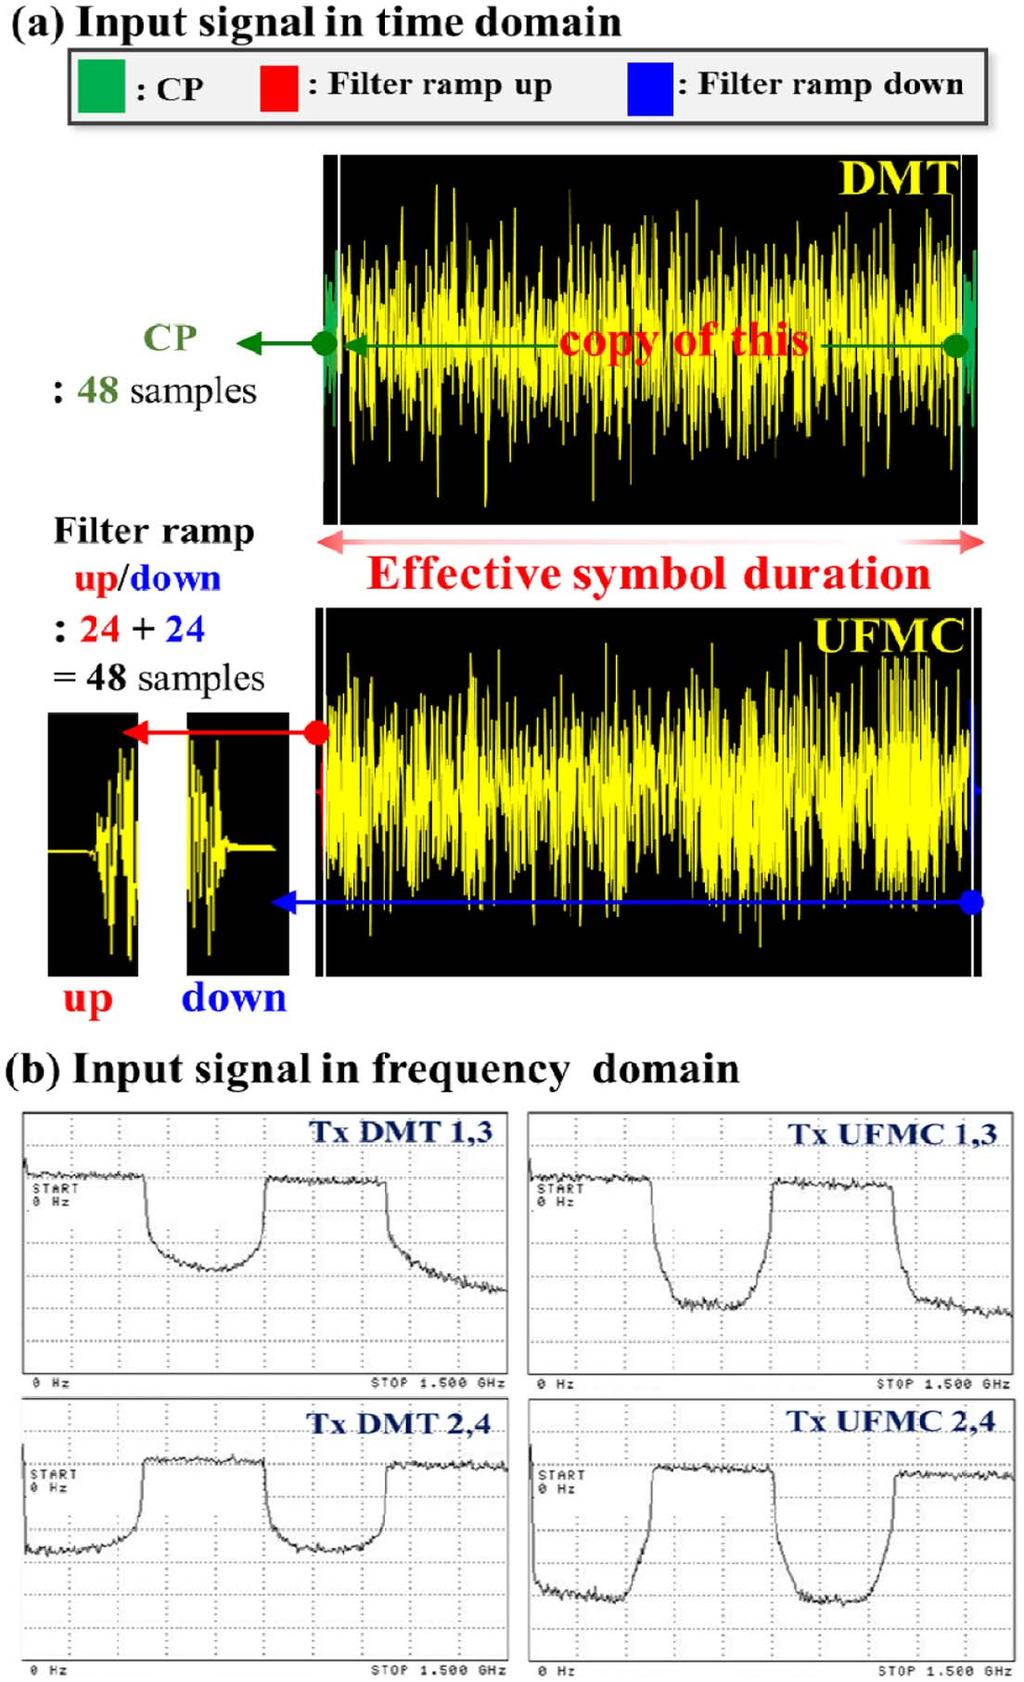 Kang et al. VOL. 8, NO. 4/APRIL 2016/J. OPT. COMMUN. NETW. 233 the transmitter, the sampling frequency was fixed to six giga samples per second (G sps).